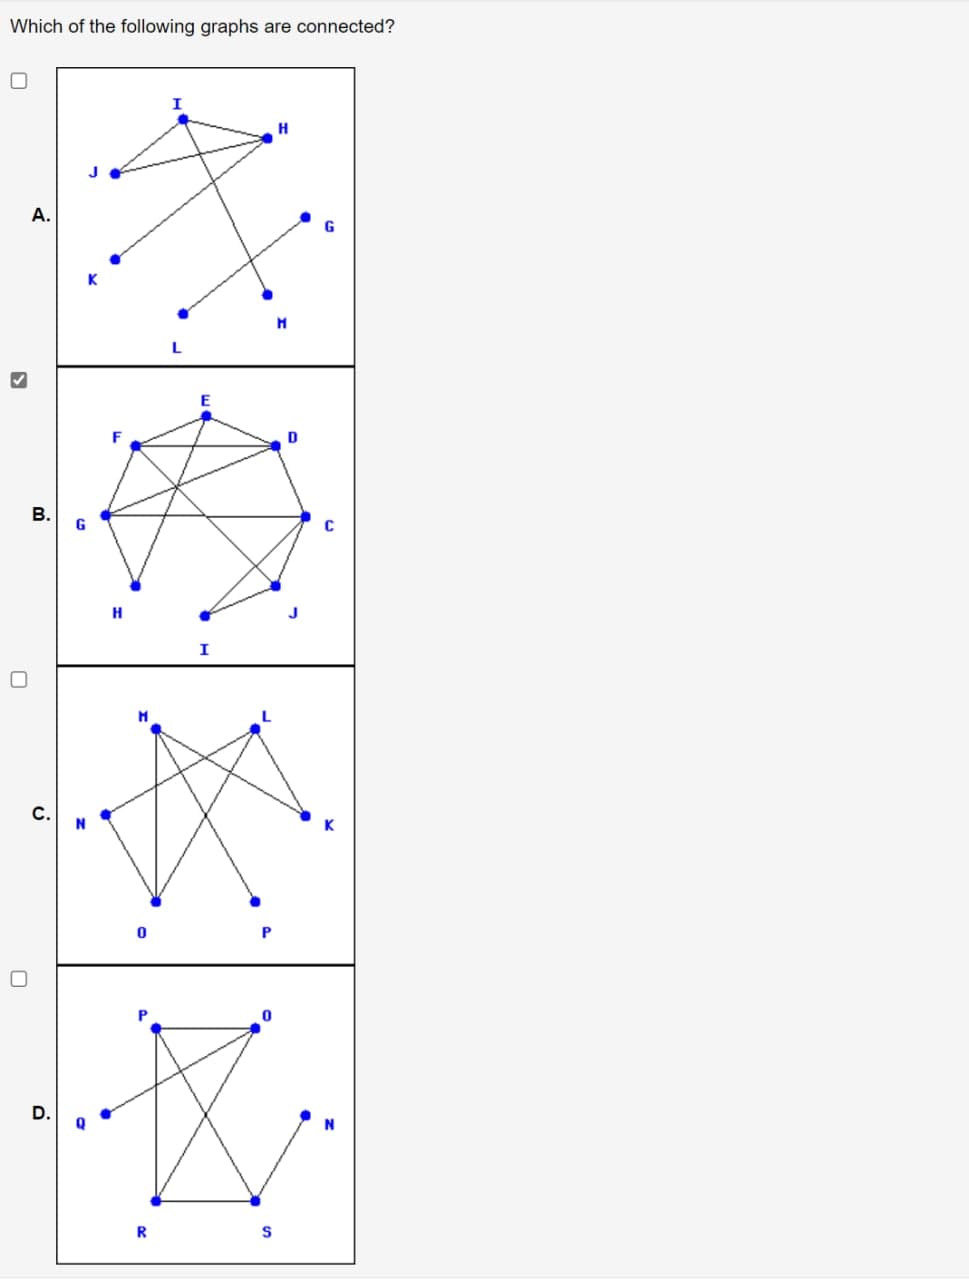 Which of the following graphs are connected?
>
0
0
A.
B.
C.
I
R
H
*
N
S
D